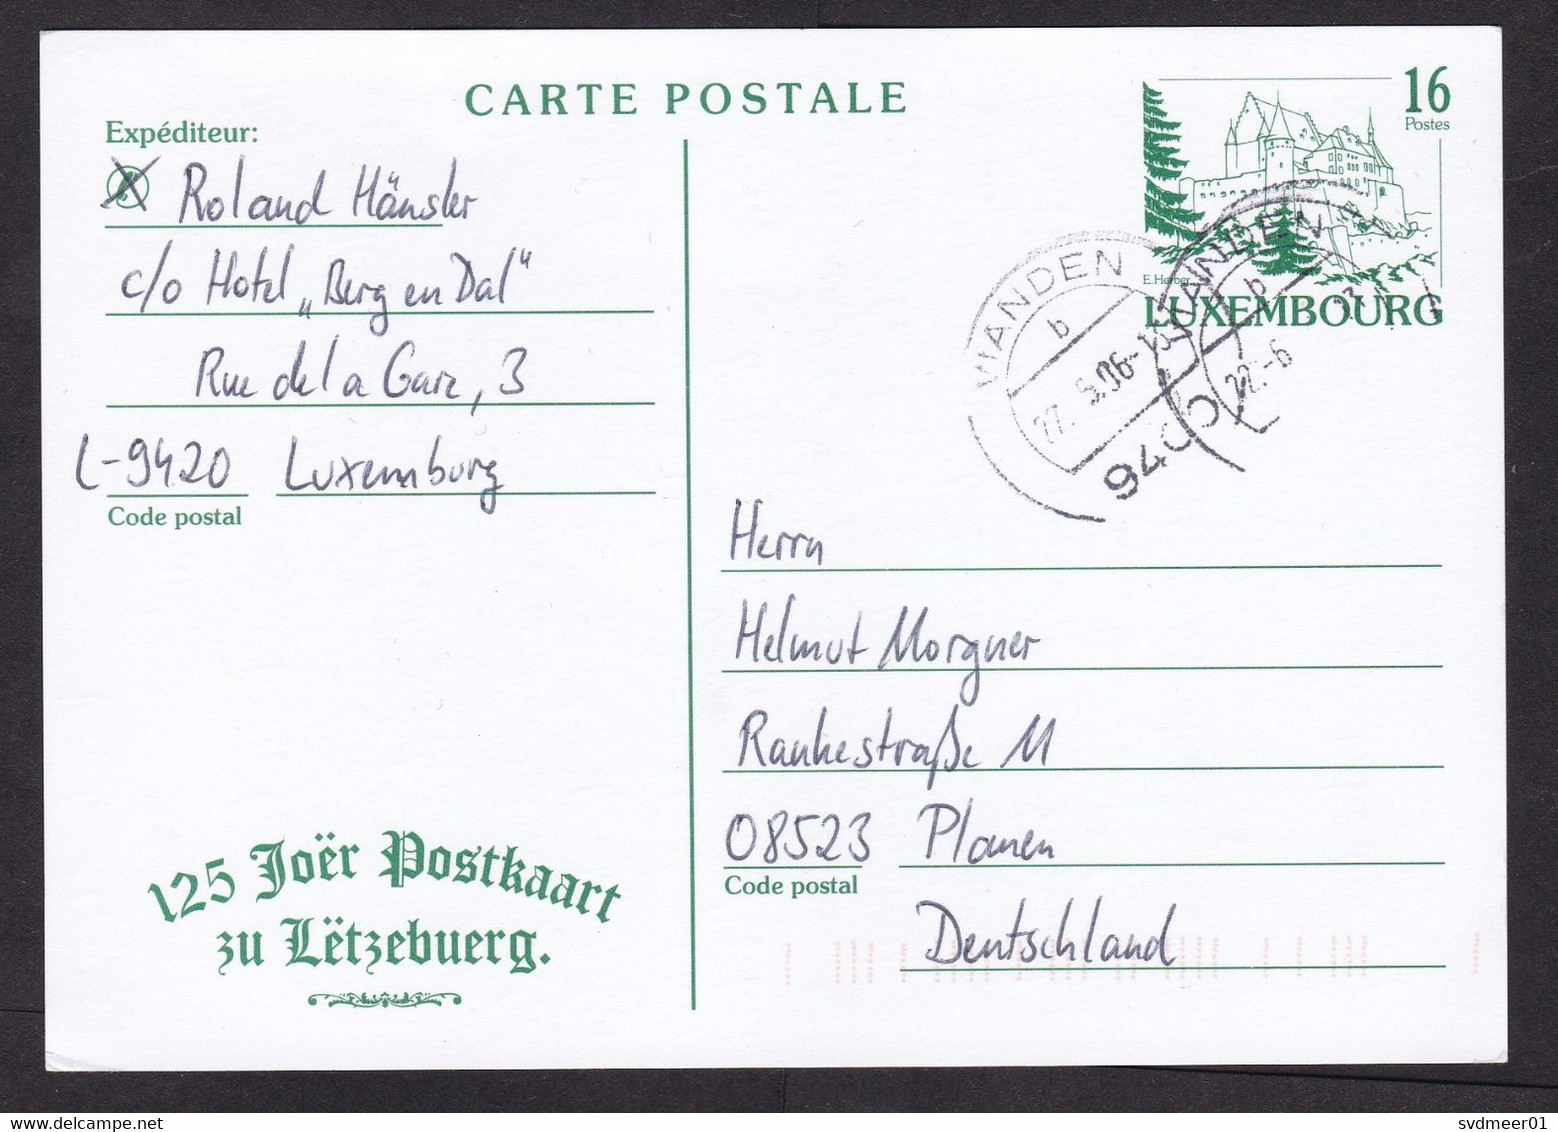 Luxembourg: Stationery Postcard To Germany, 1996, Castle, Cancel Vianden (traces Of Use) - Covers & Documents